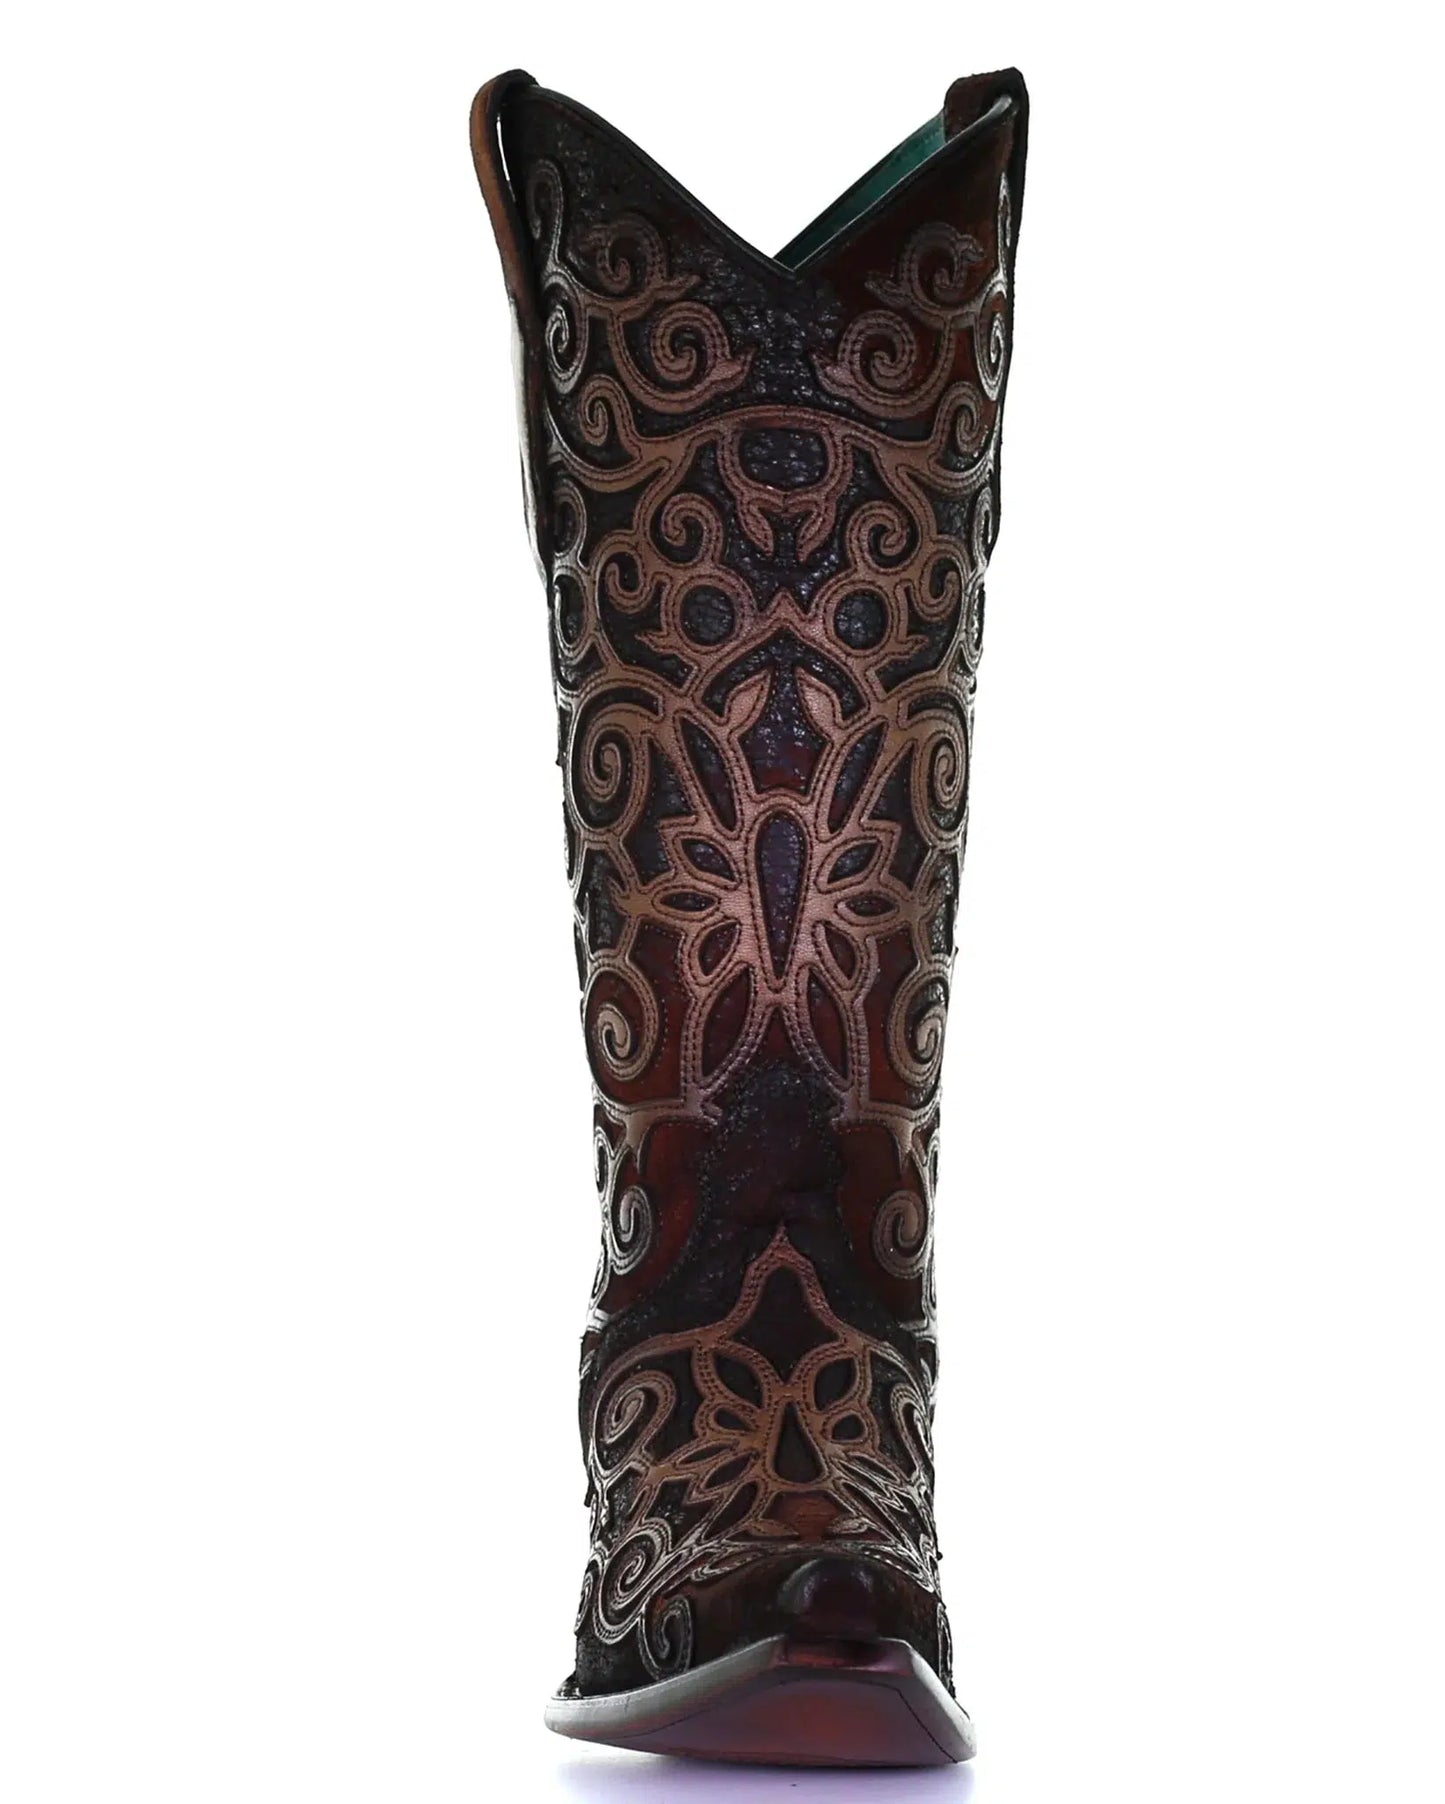 C3744-M Corral brown and red cowhide leather boots for women